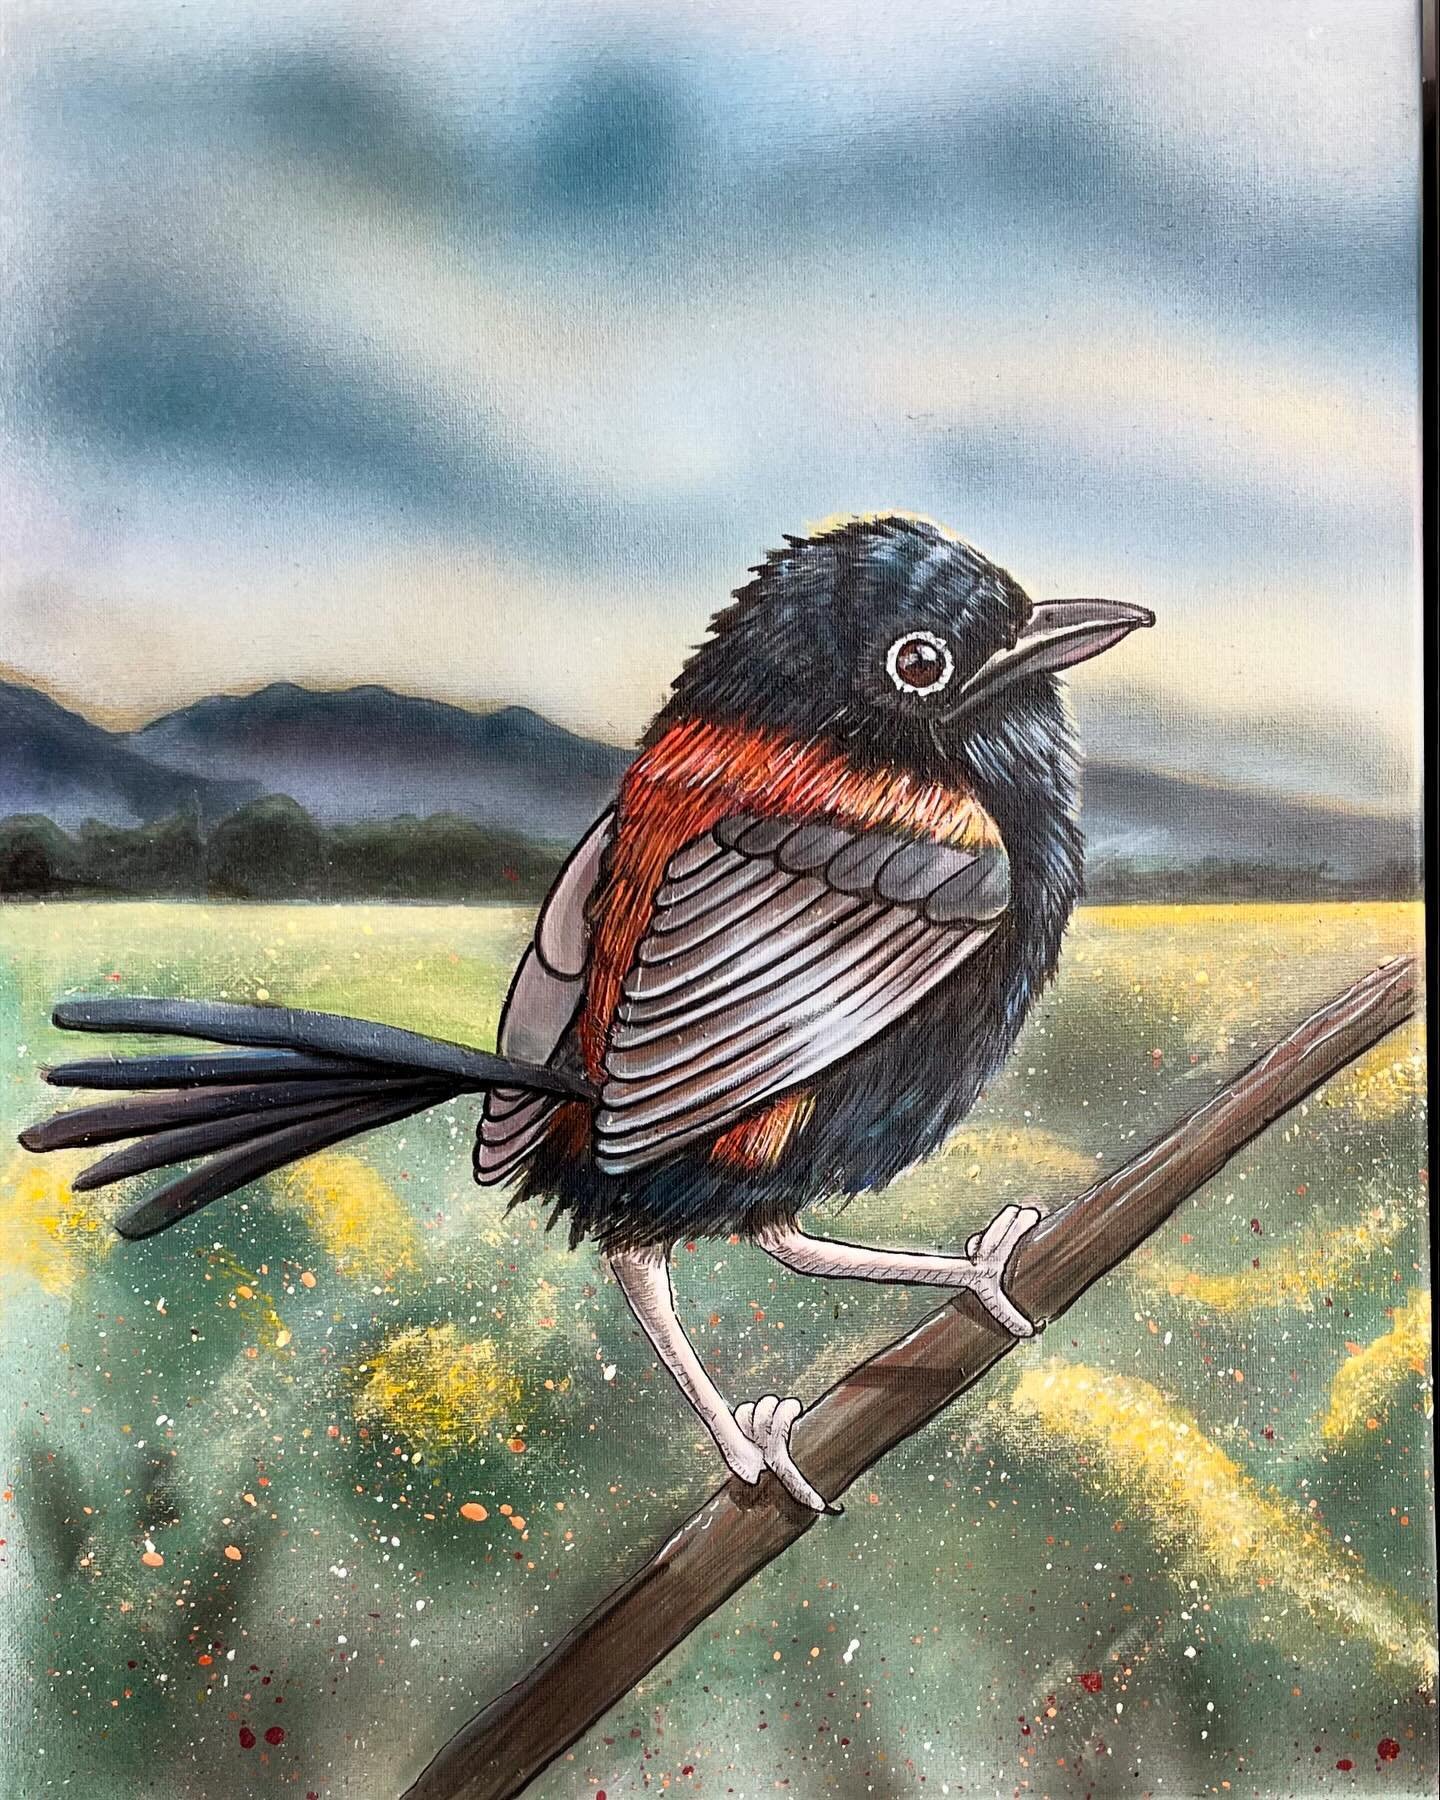 Three Amigos 

One of Three

Inspired by spotting red-backed fairy-wrens on morning walks with @jessiedenmeadenaturopath and baby Otis.

I'm so happy these three cheeky fellas are staying together.

Acrylic on canvas

#fairywren #birdart #australiana